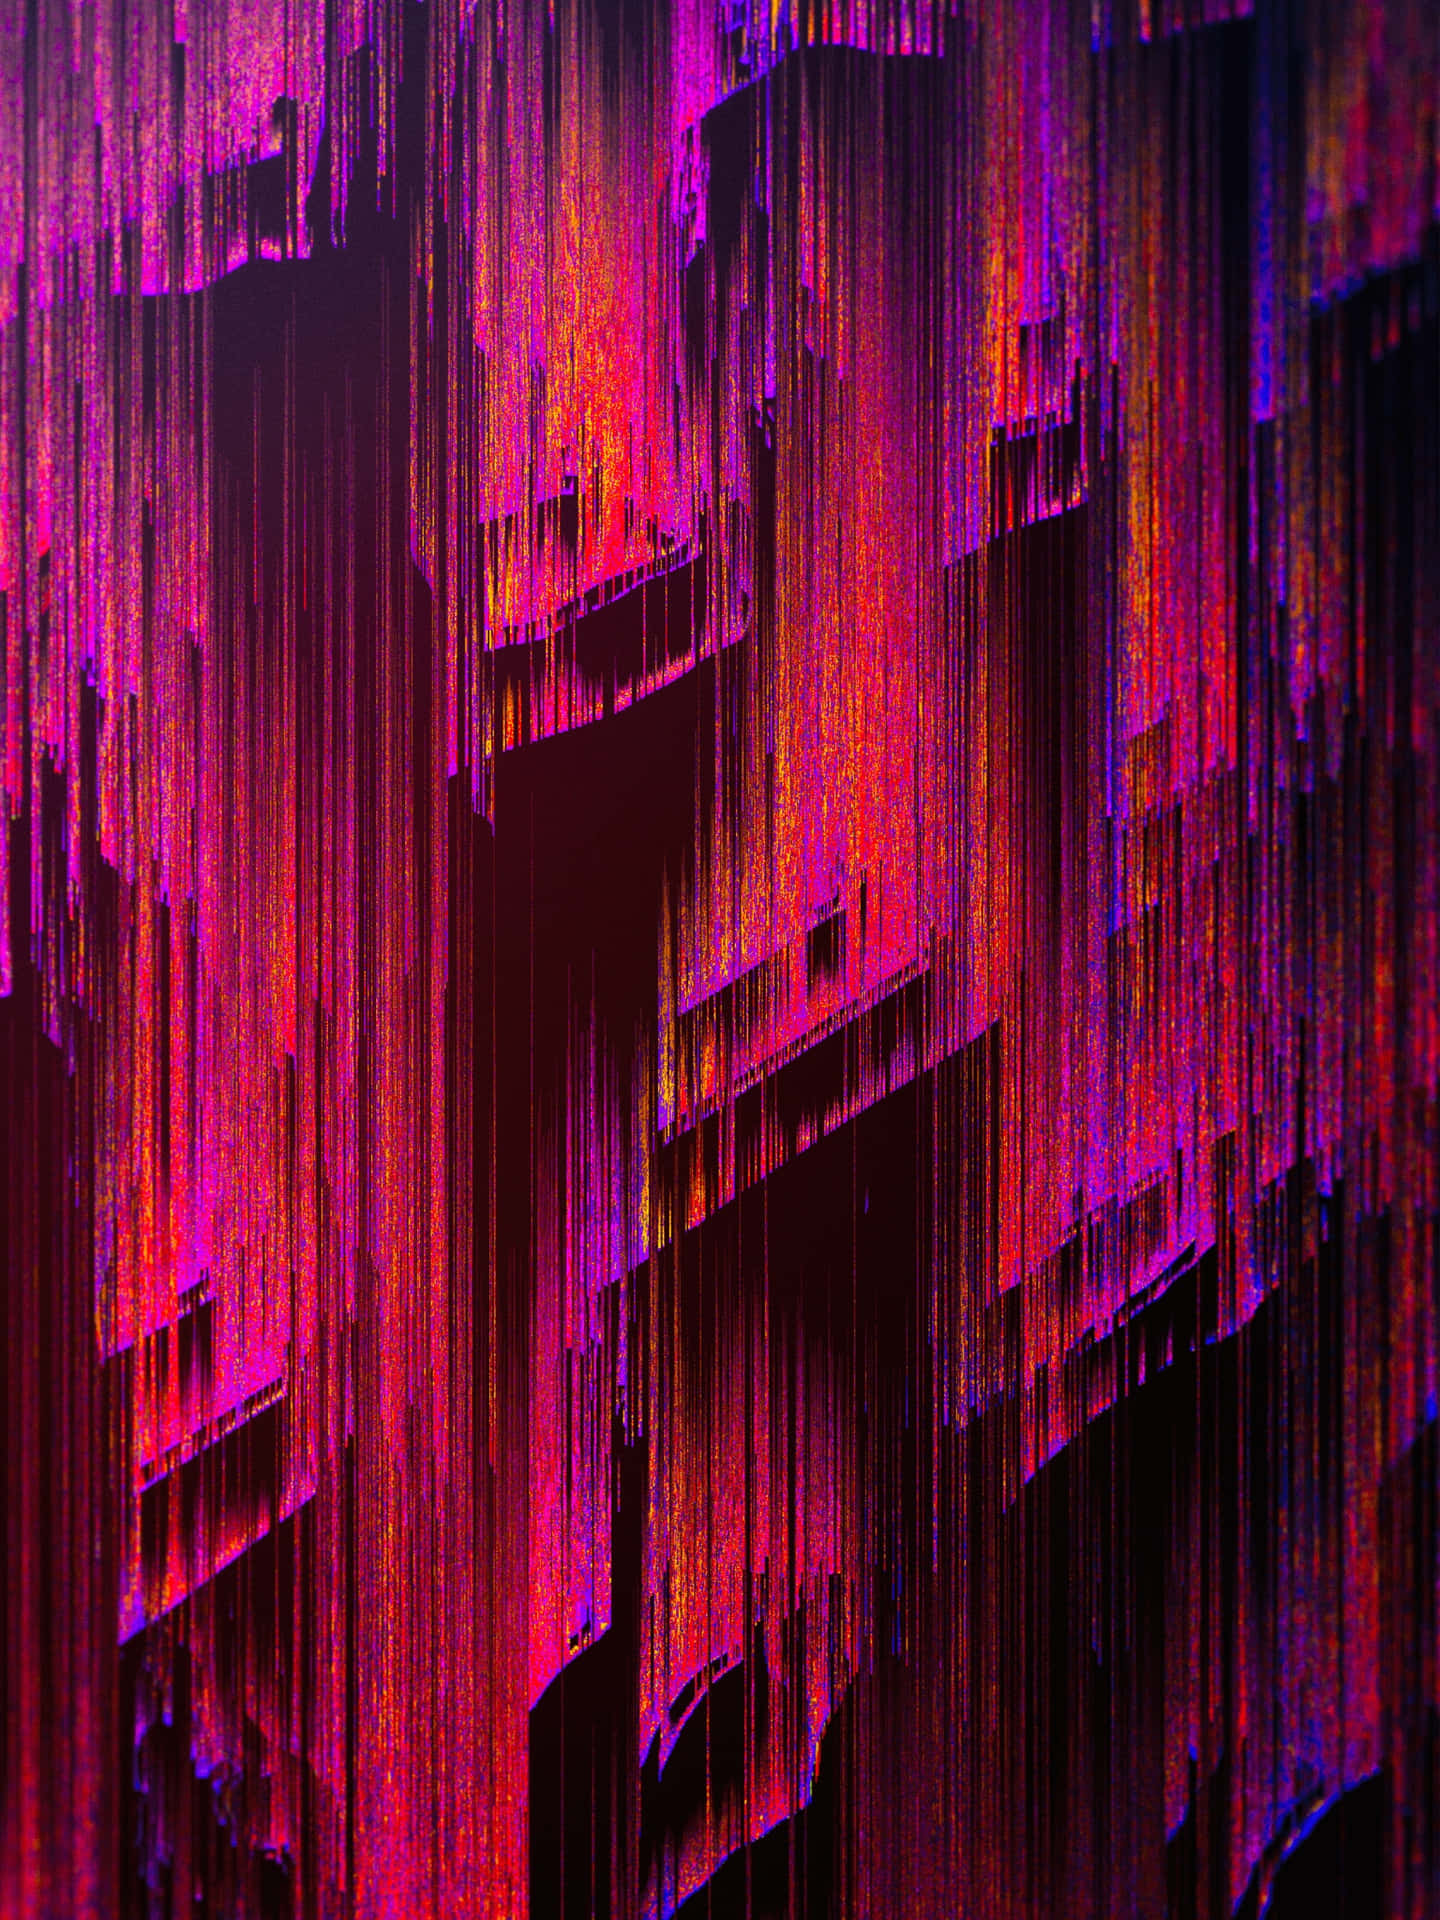 Glitch Effect Adds New Dimensions Of Possibility To Digital Artwork Wallpaper